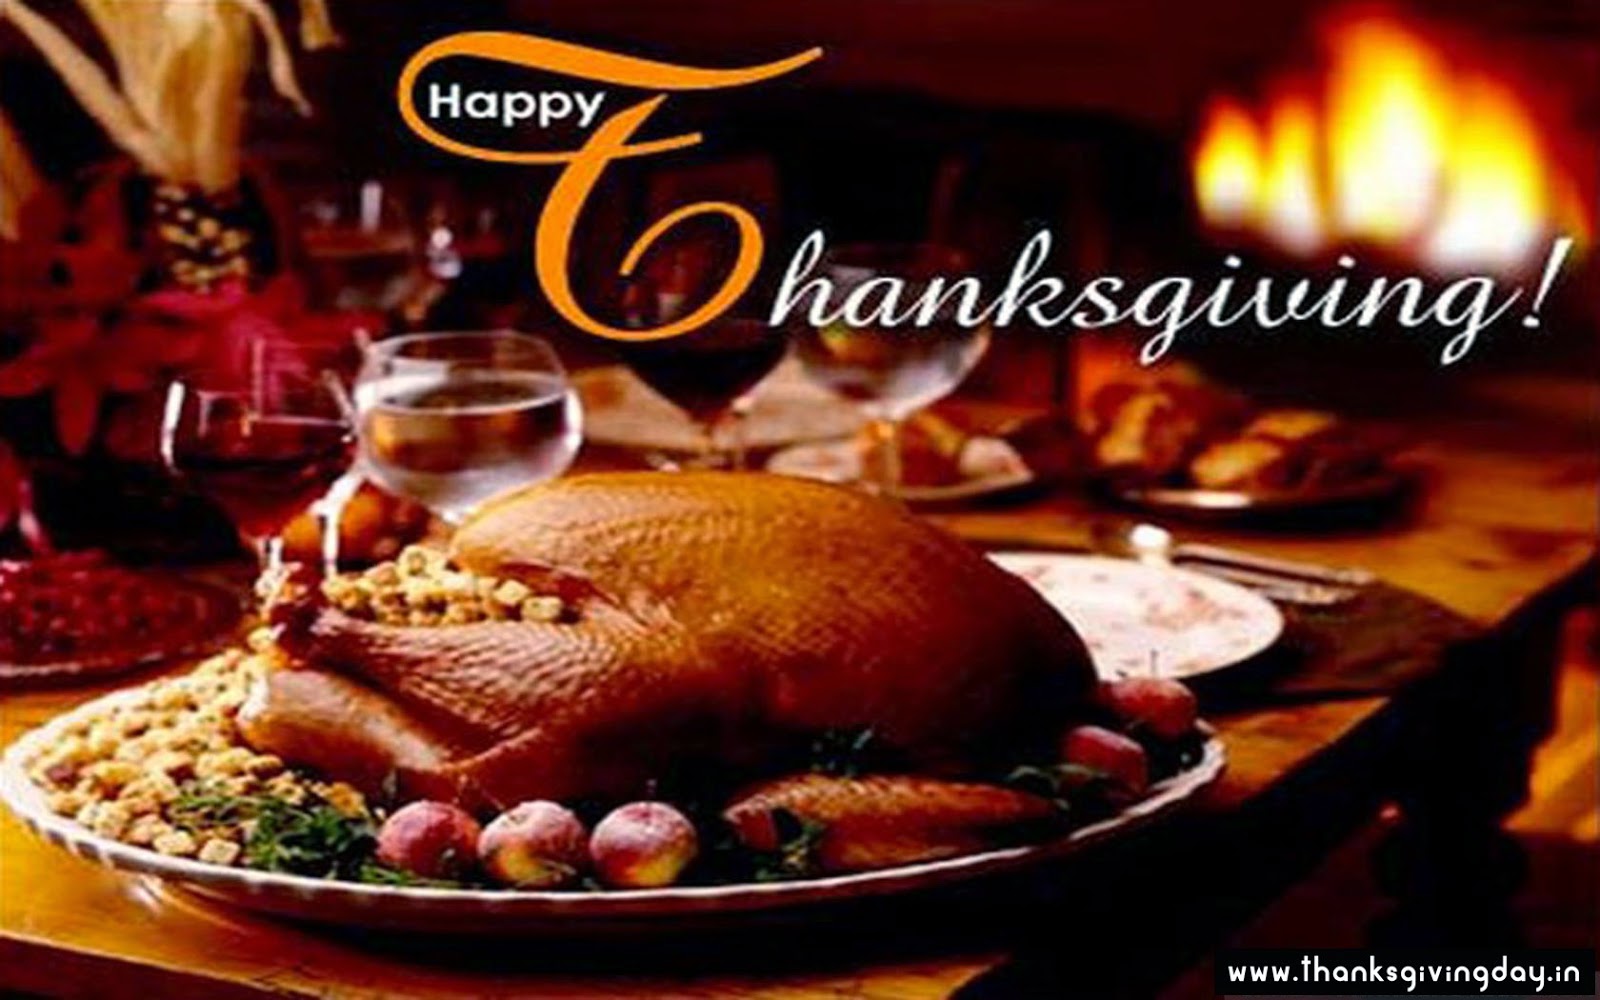 Thanksgiving day wallpapers 2014   Free Desktop backgrounds